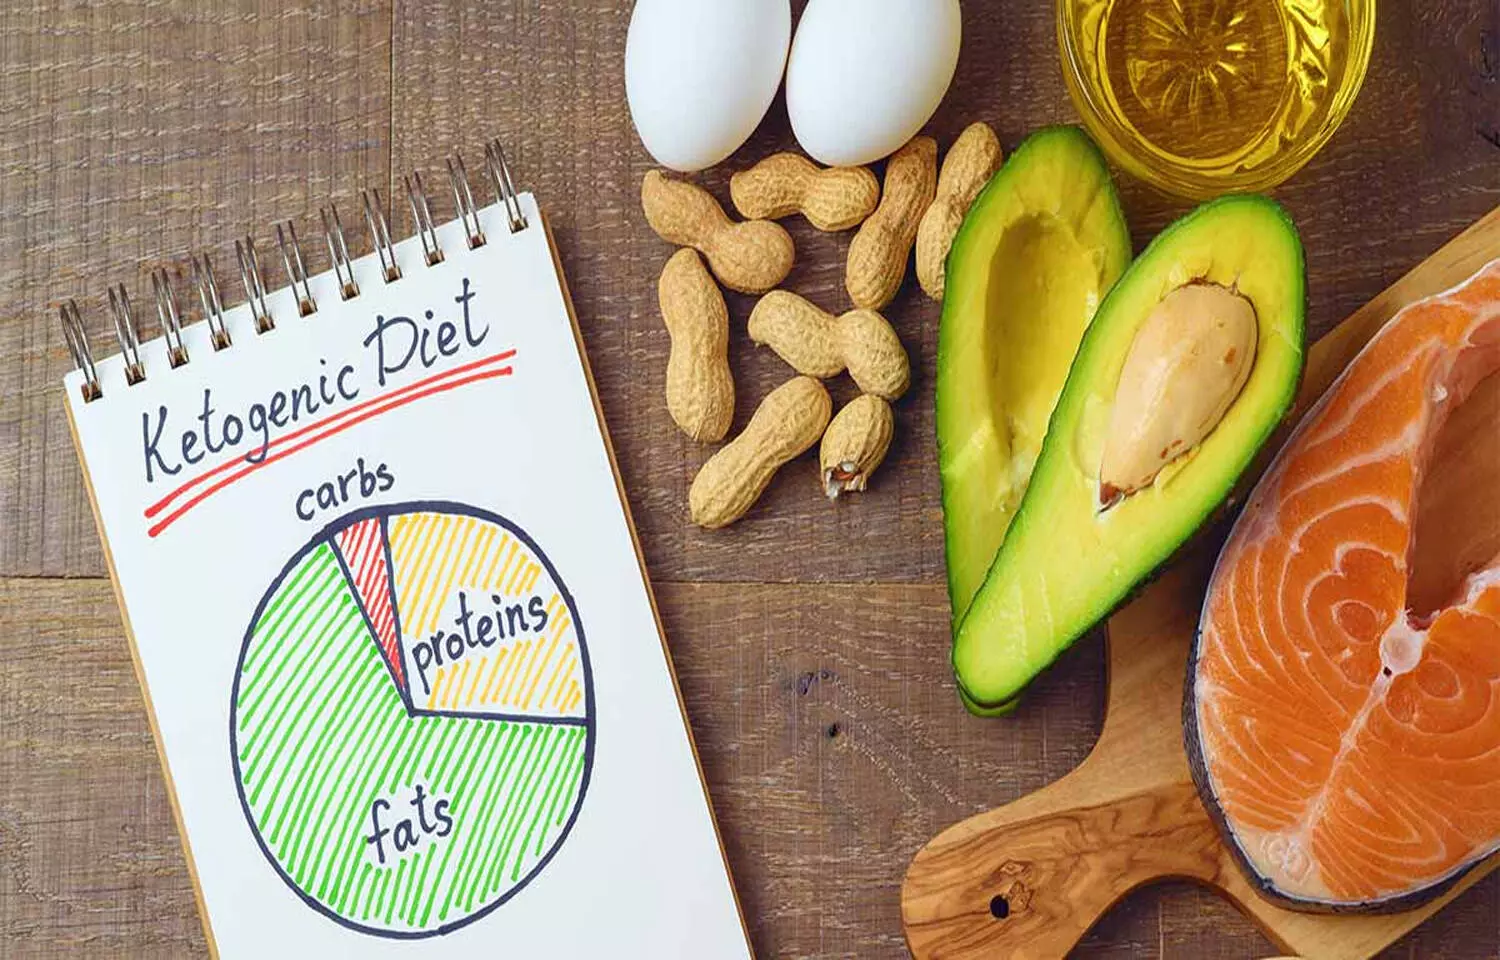 Ketogenic diets could prevent, reverse heart failure, claims study